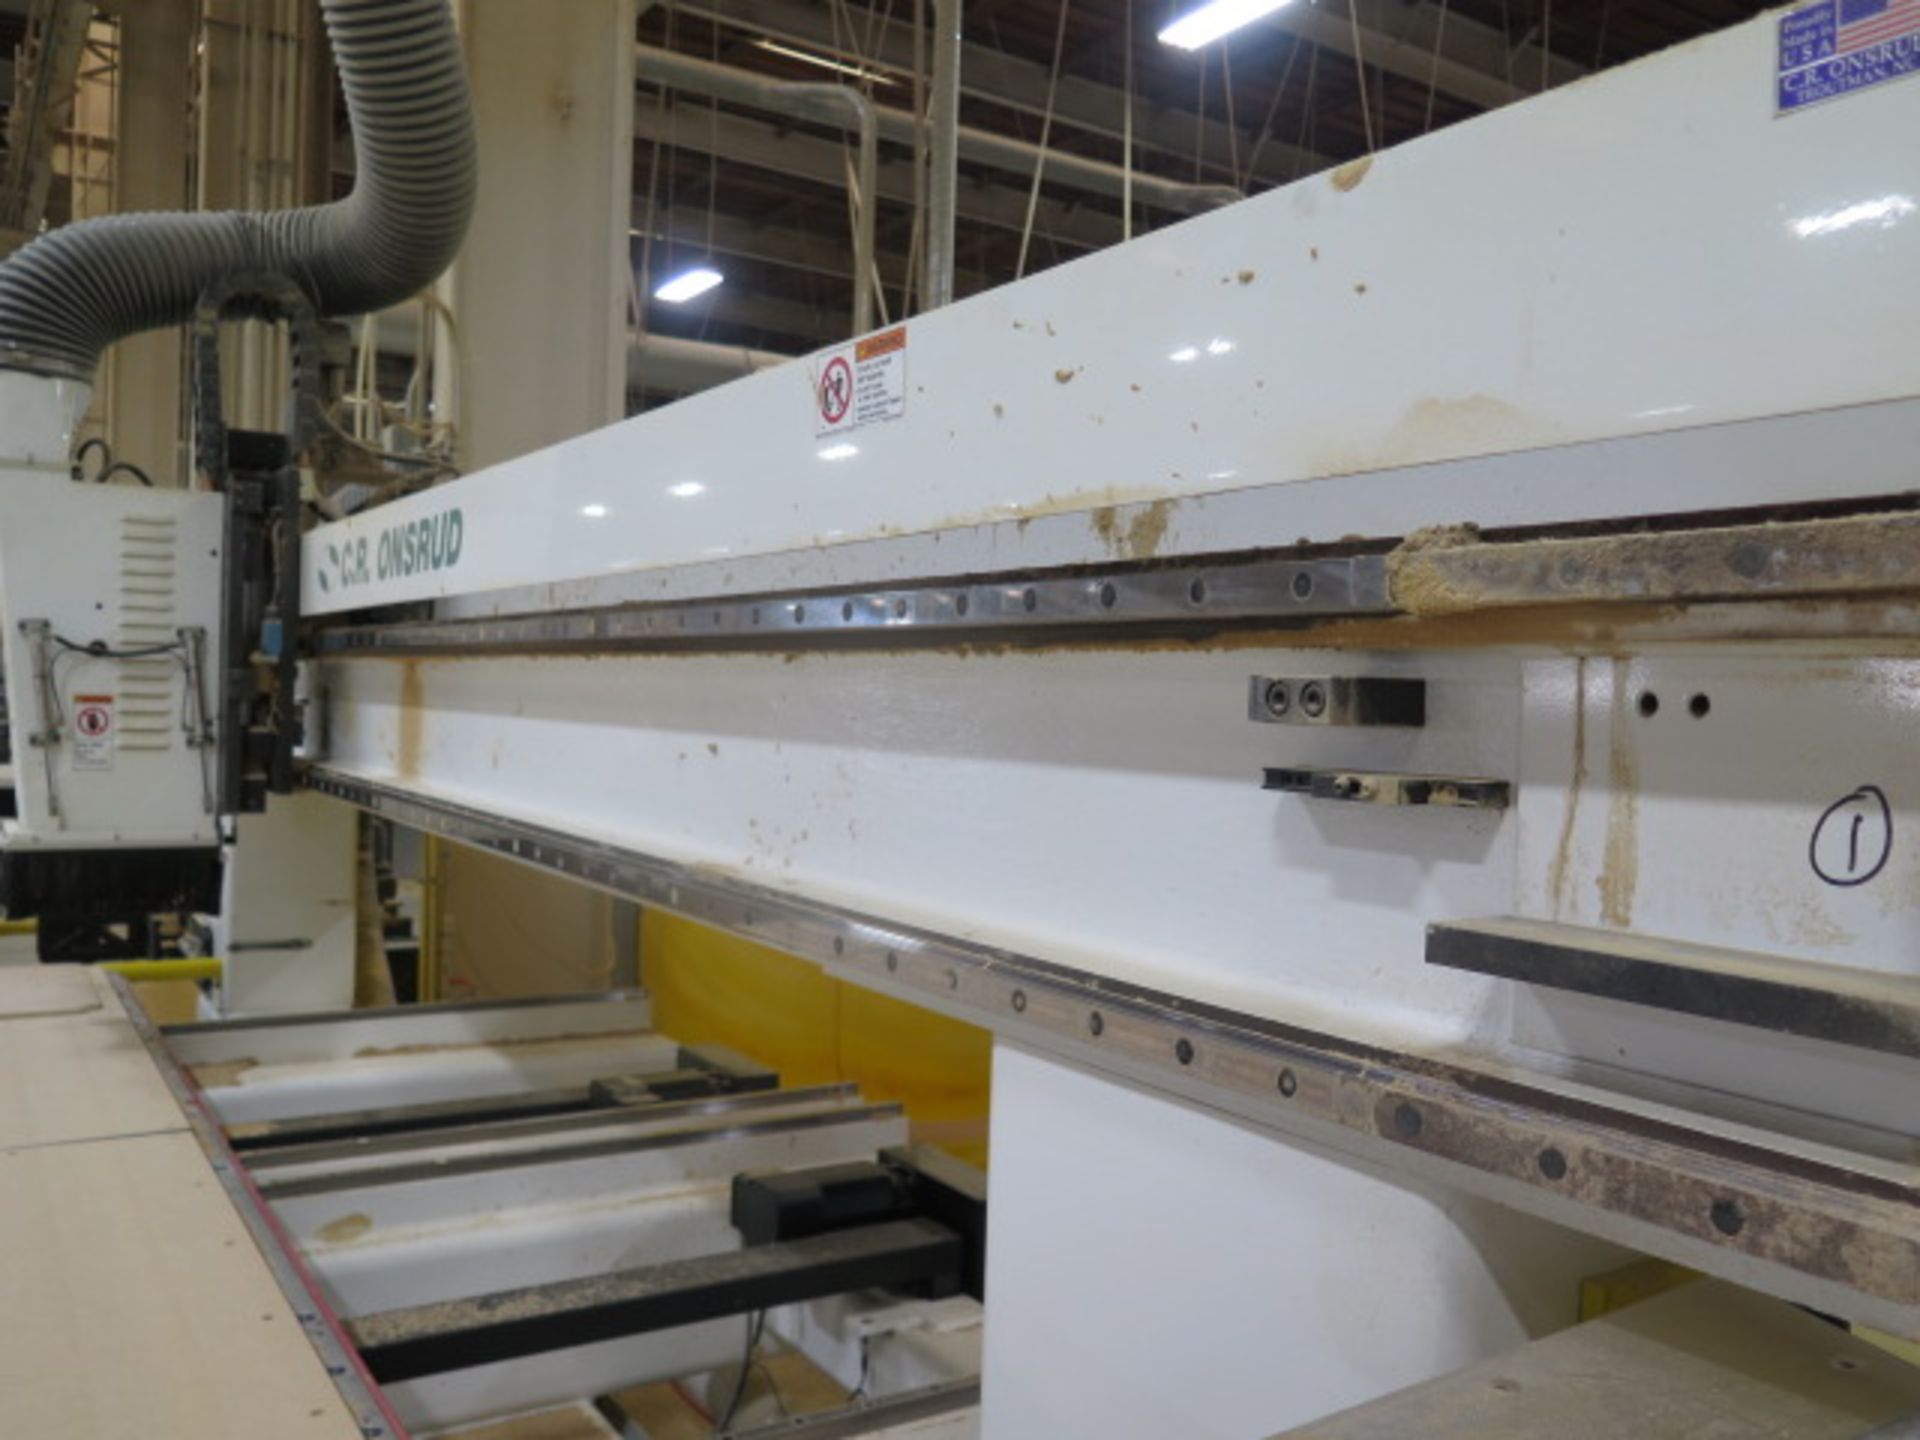 2008 C.R. Onsrud 122C18 CNC Router s/n 12280701 w/ WinMedia CNC Controls, SOLD AS IS - Image 10 of 18